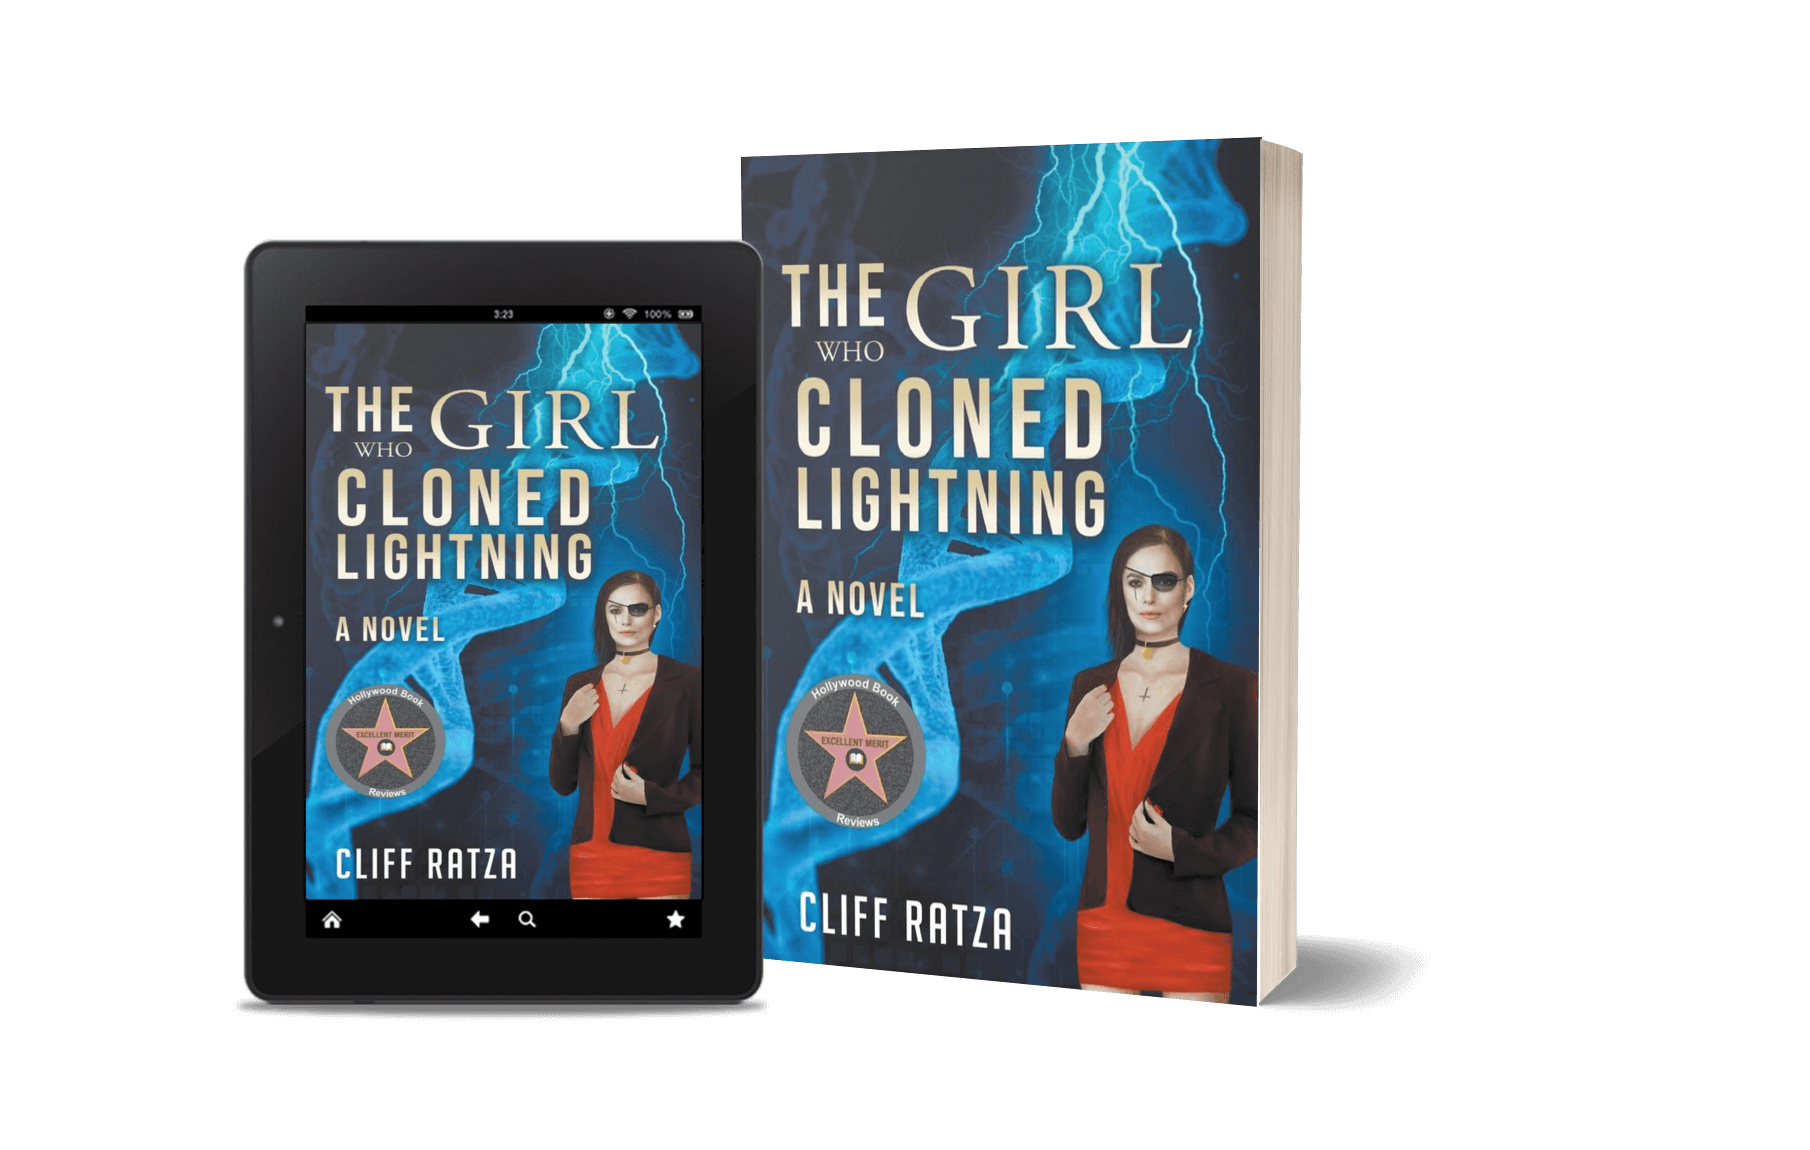 Book called The Girl Who Cloned Lightning beside a tablet displaying its digital version